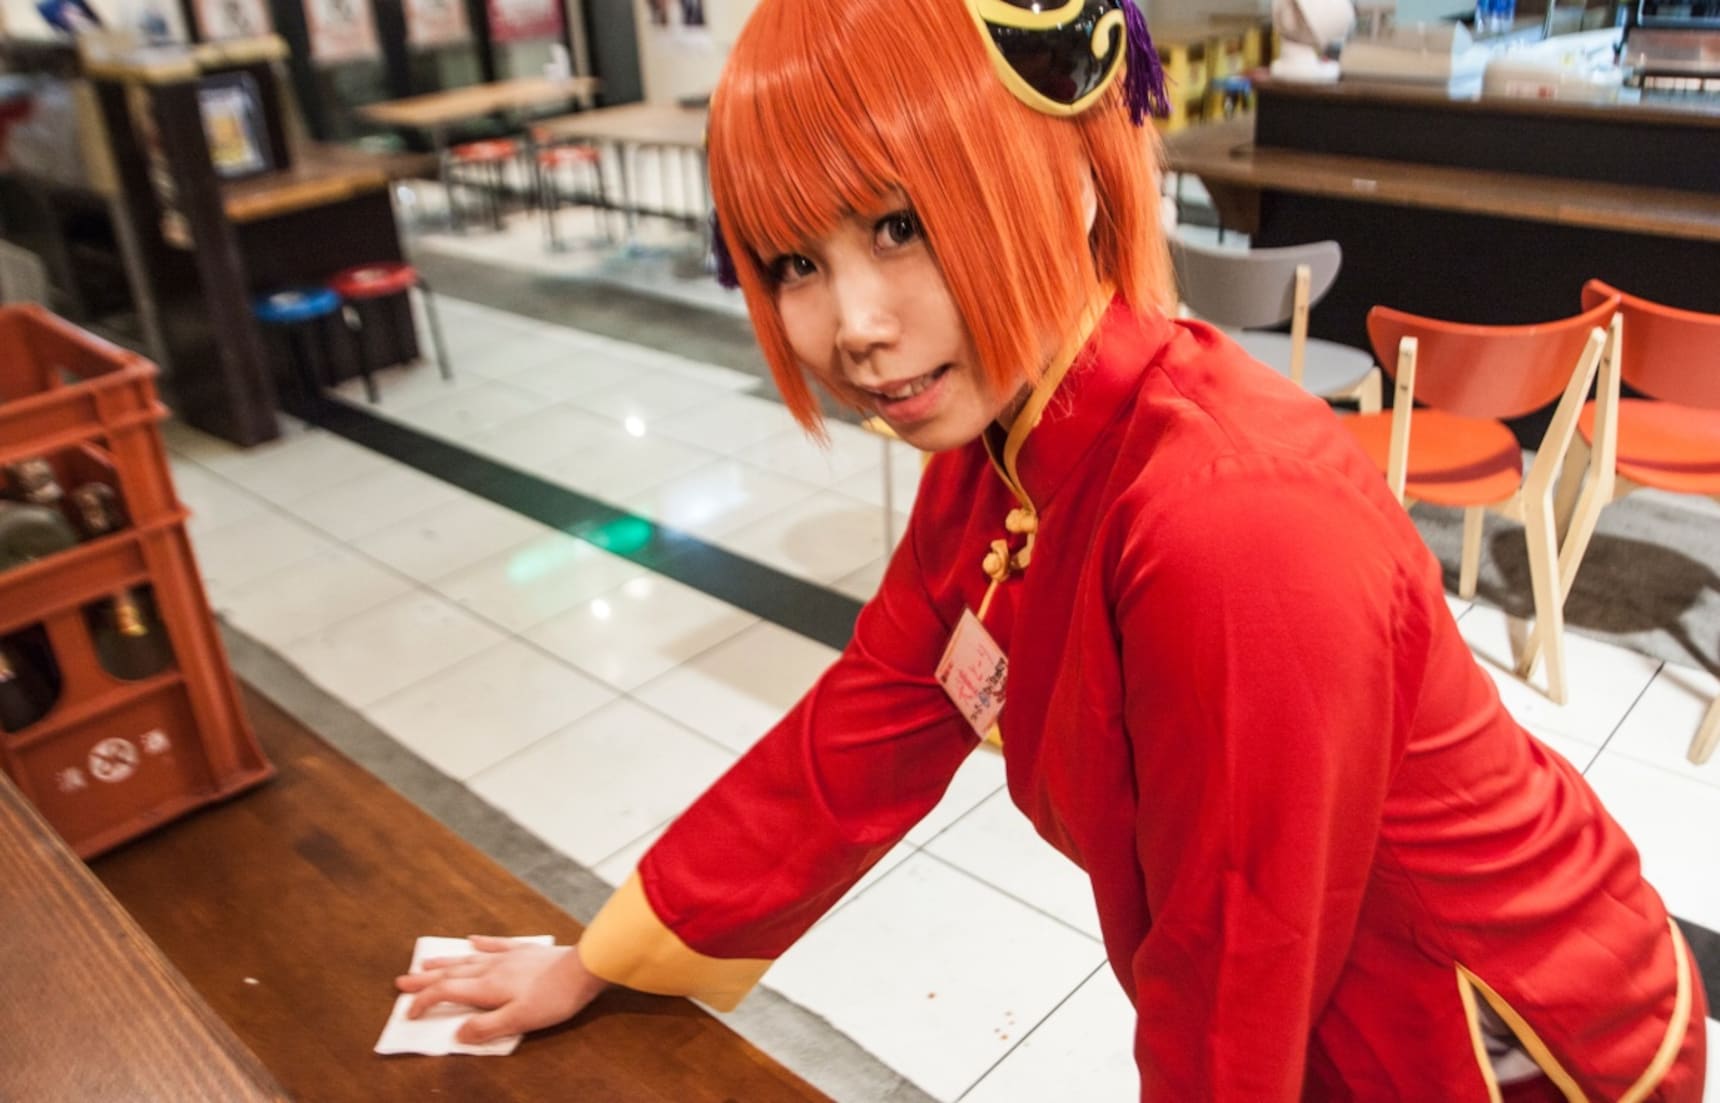 Eat, Drink & Be a Merry Cosplayer!